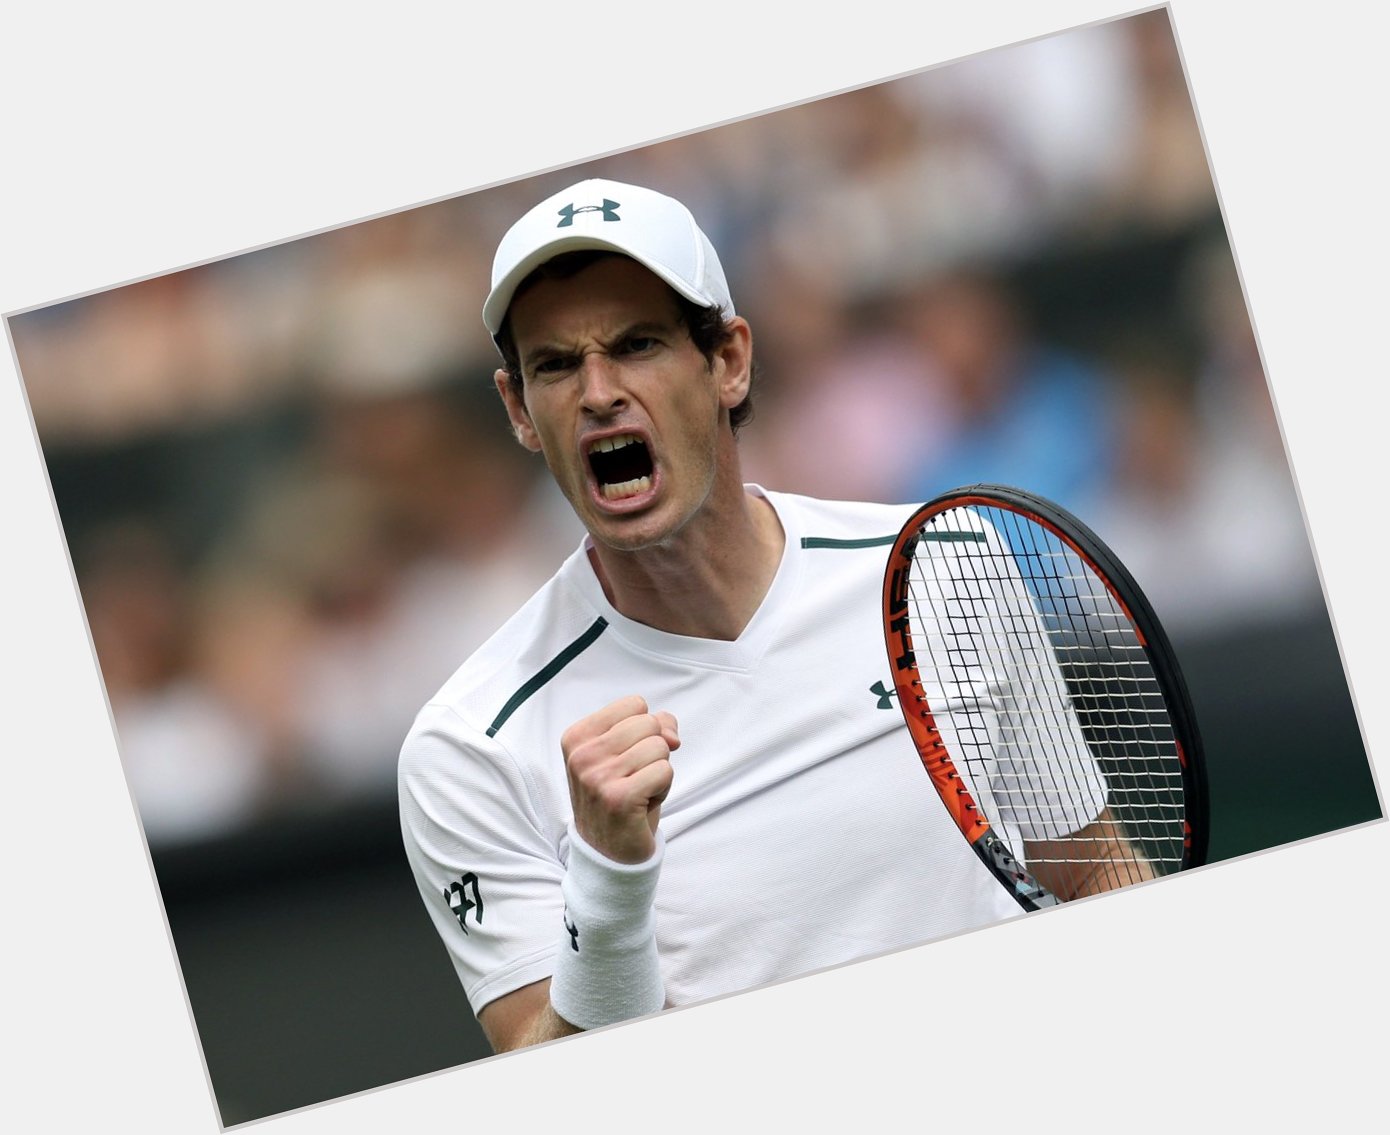    - Wimbledon Titles: 2

- Olympic Golds: 2

- US Opens: 1

- Davis Cups: 1

Happy birthday, Sir Andy Murray. 